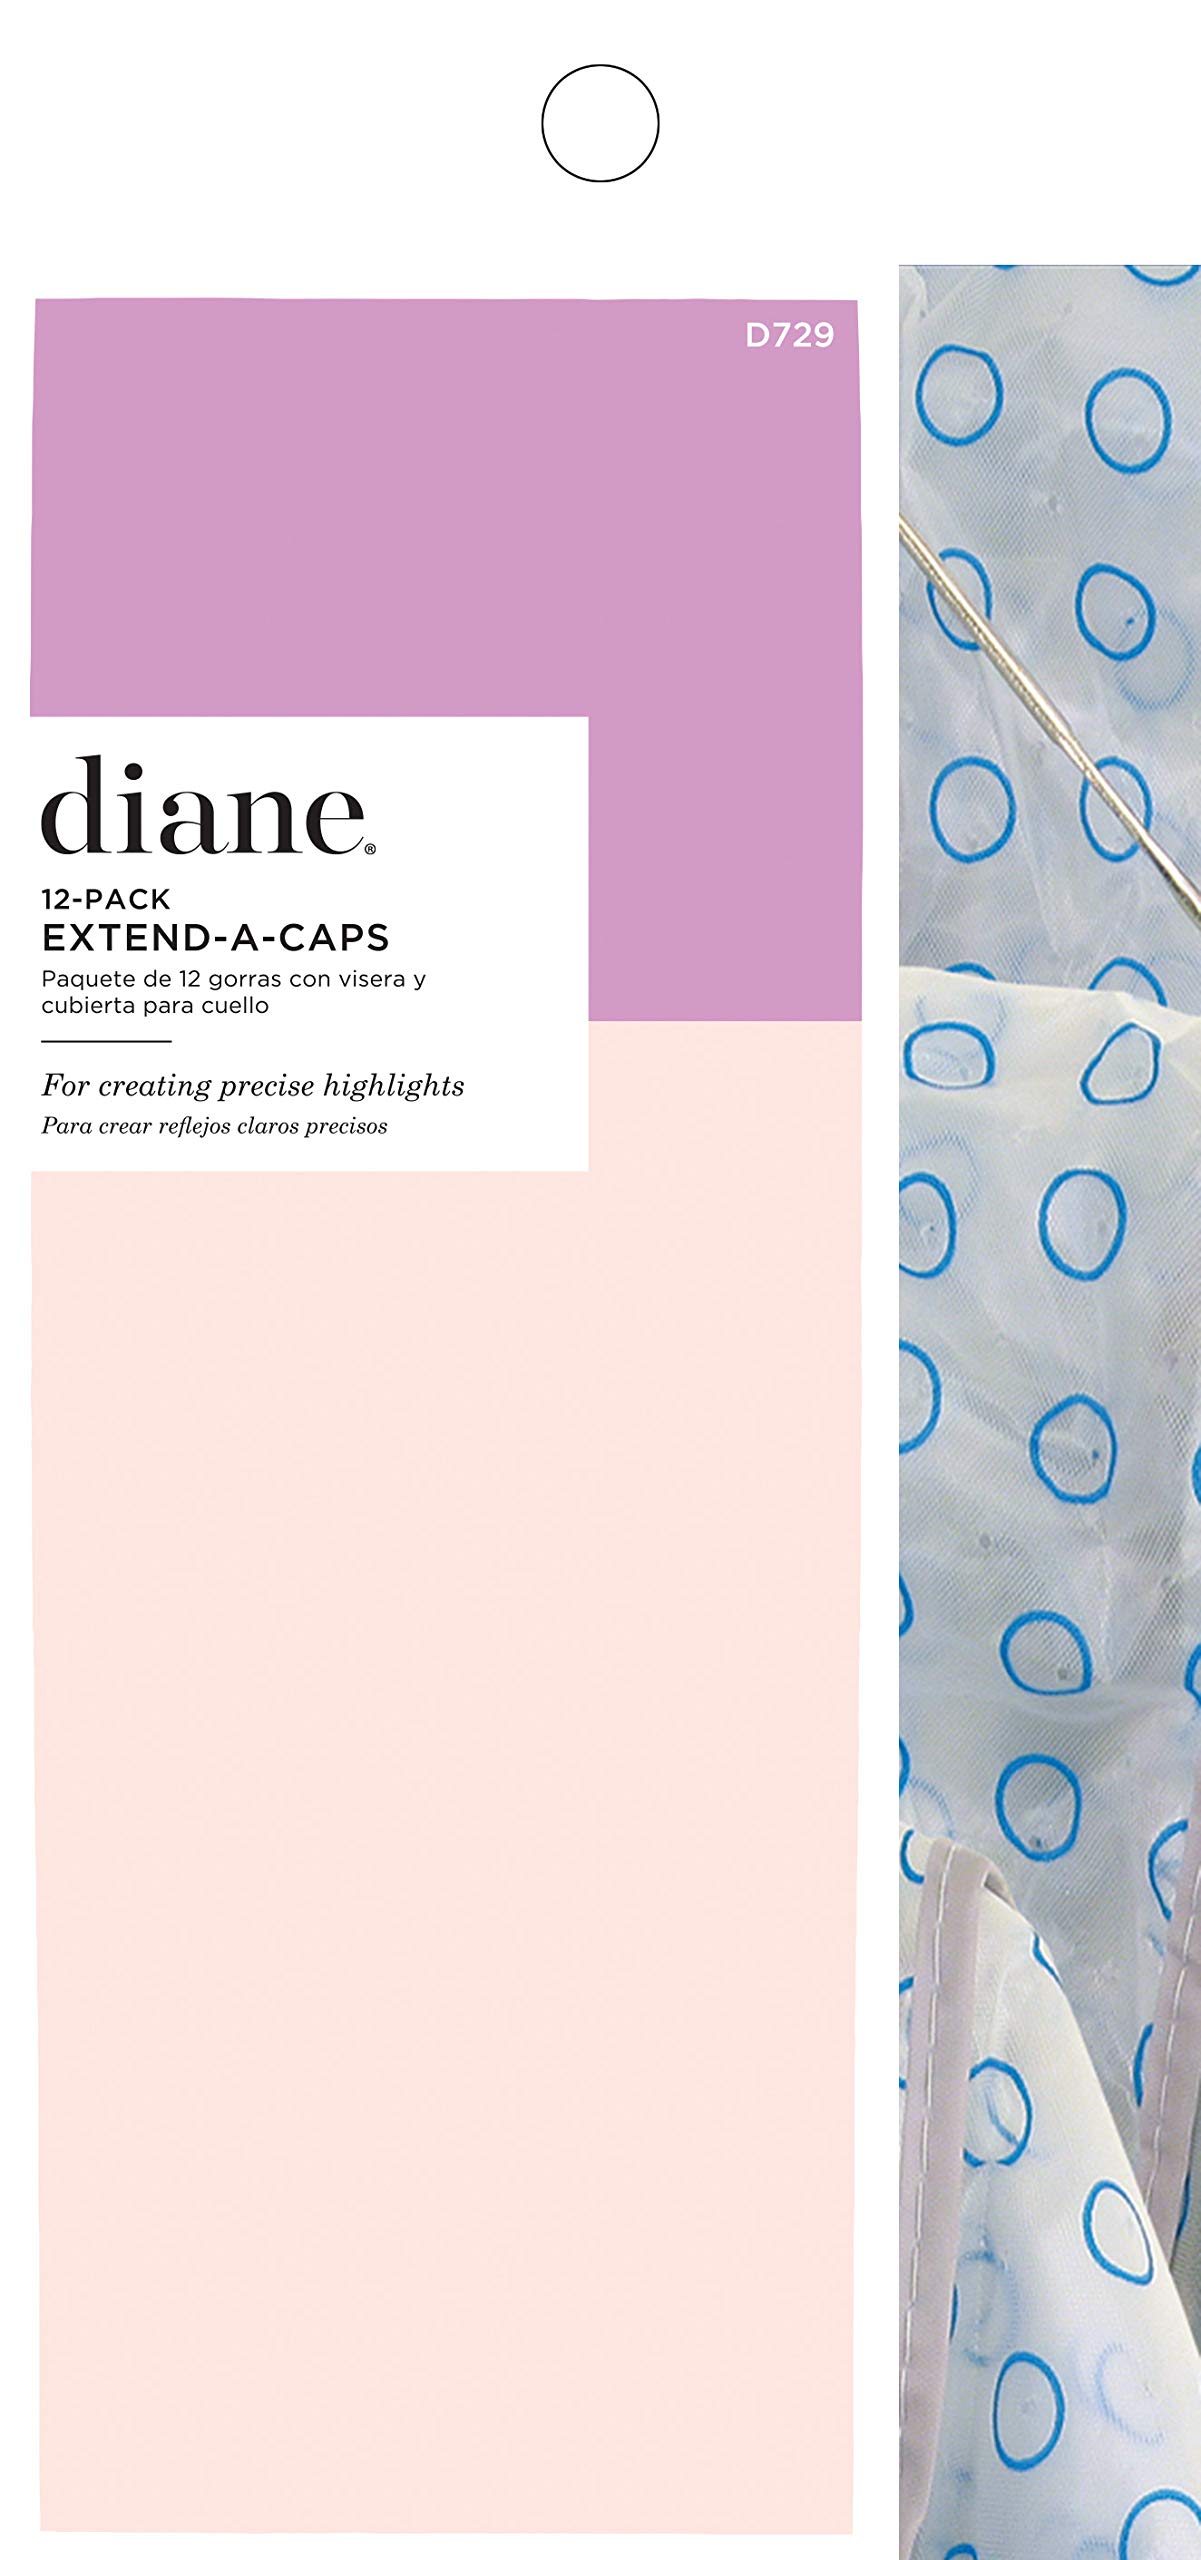 Diane Extend-A-Cap Salon Hair Caps with Metal Hook for Highlights Clear Extra Large D729, 12 Count (Pack of 1)